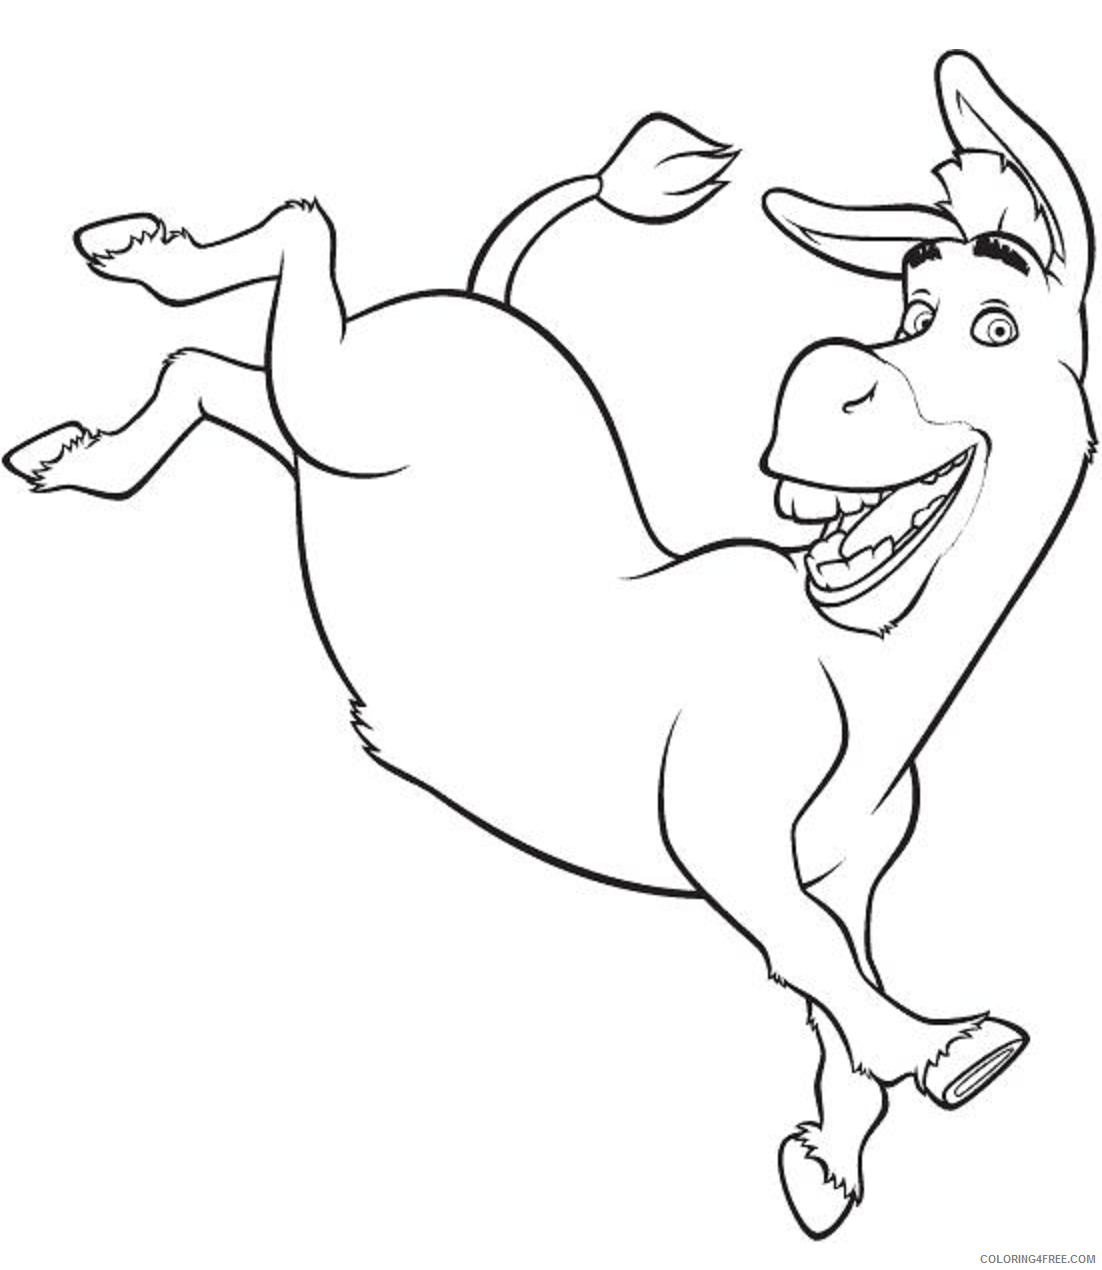 Donkey Coloring Pages Animal Printable Sheets funny_donkey 2021 1699 Coloring4free